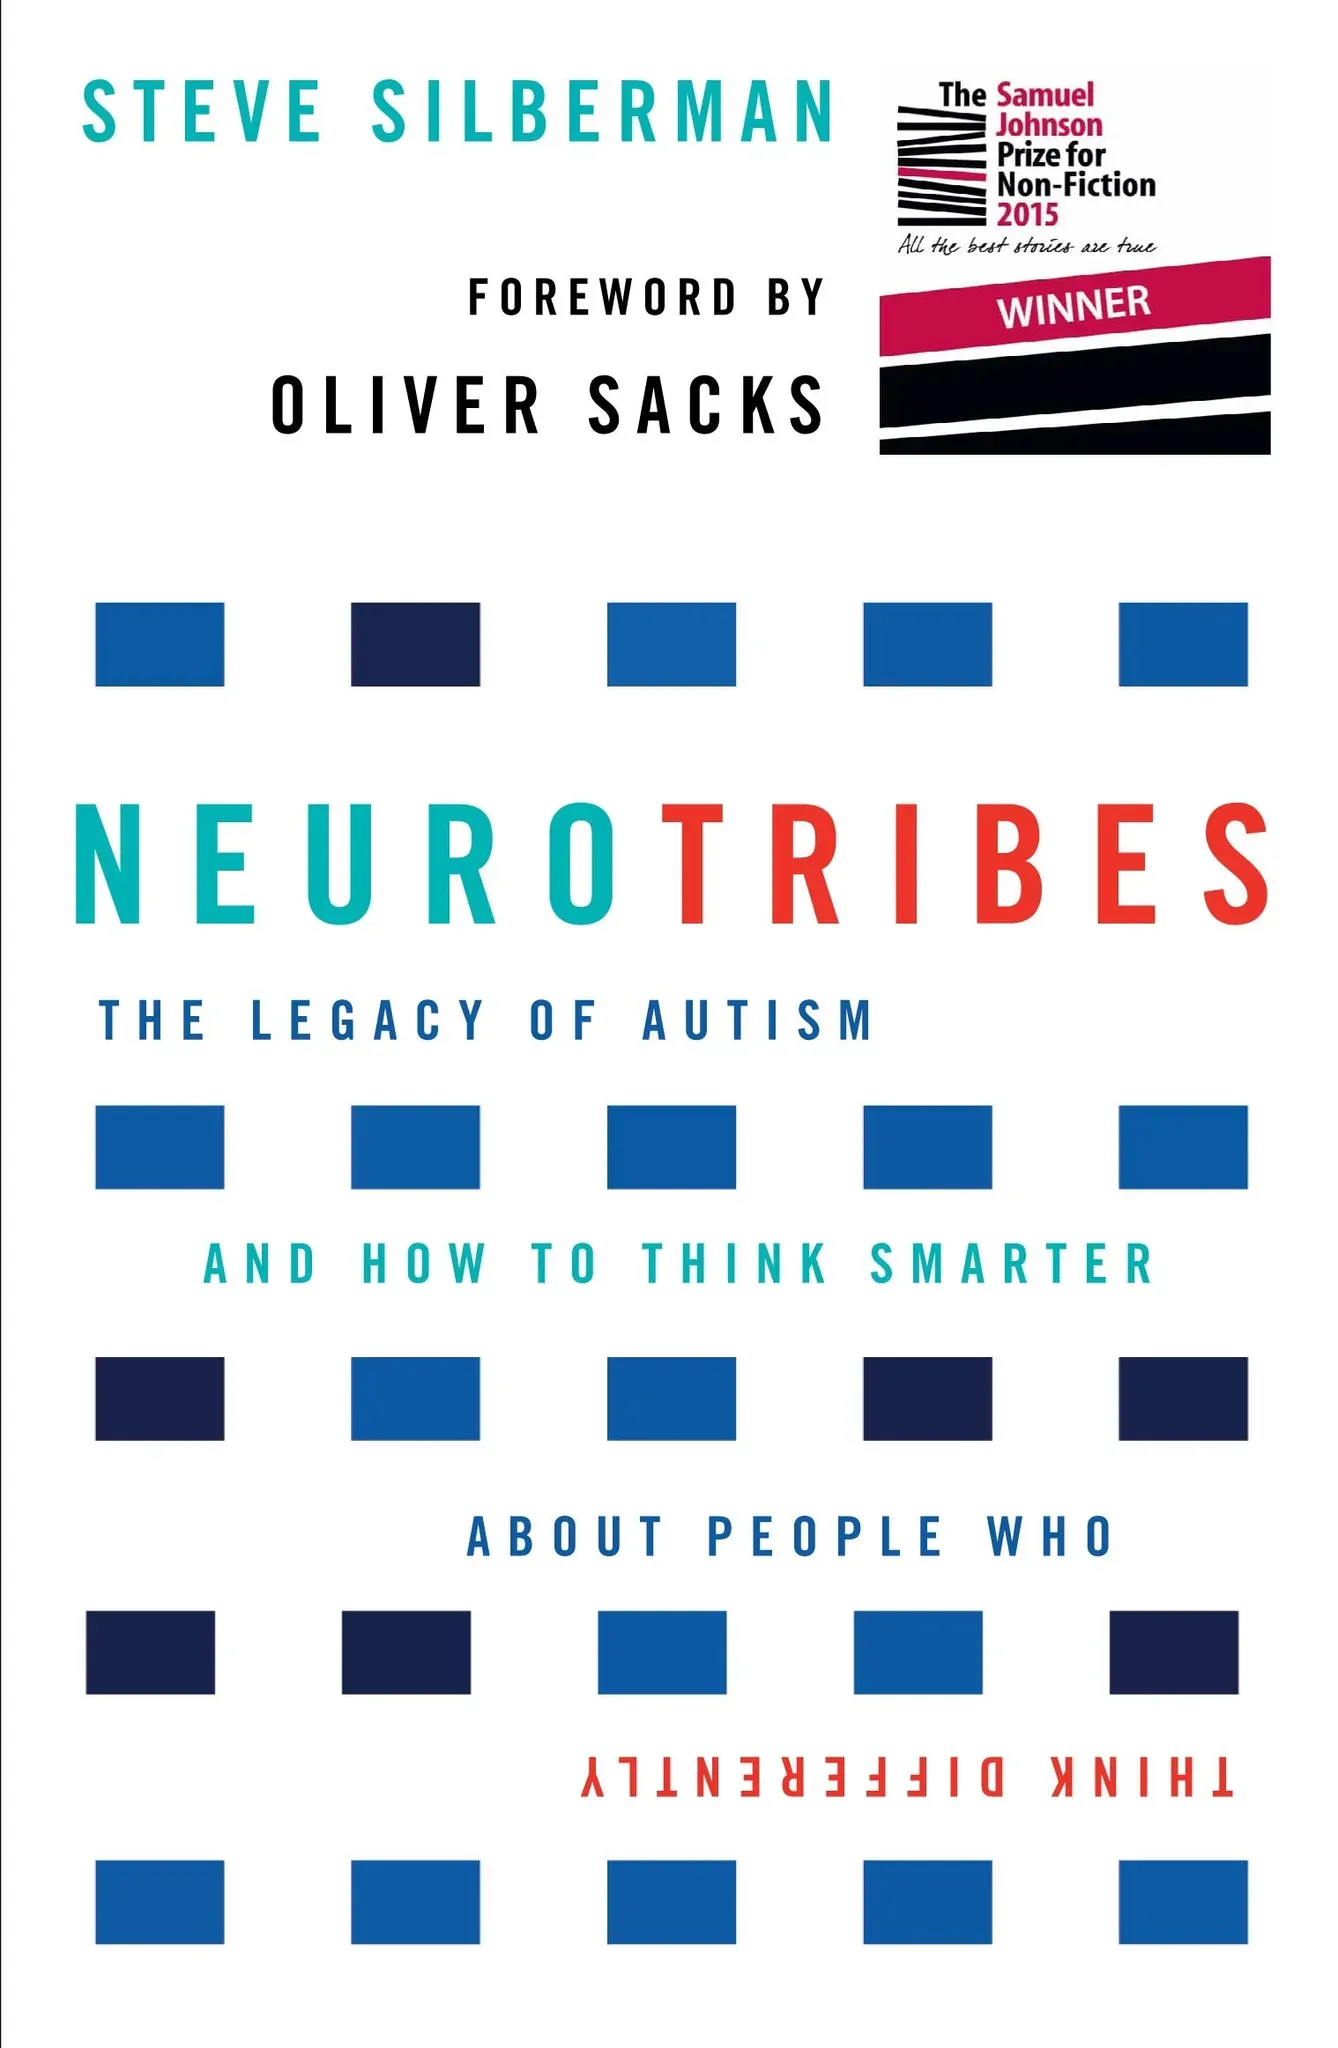 NeuroTribes: The Legacy of Autism and How to Think Smarter About People Who Think Differently. Forew. by Oliver Sacks. Winner of the Samuel Johnson Prize for Non-Fiction 2015